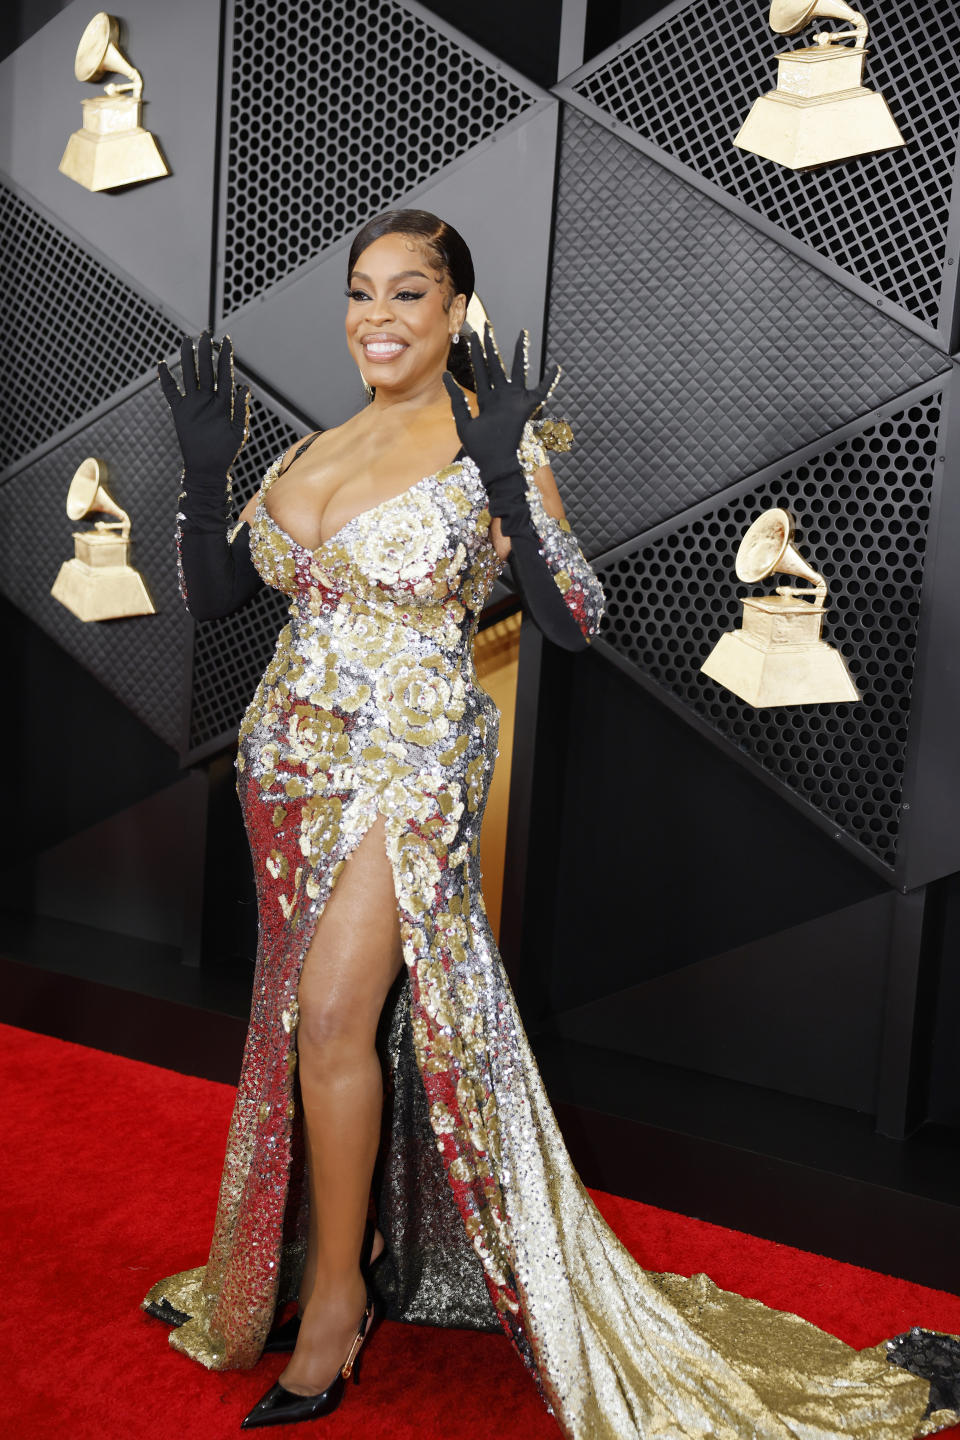 Niecy Nash stunned in her metallic gown. Photo: Getty